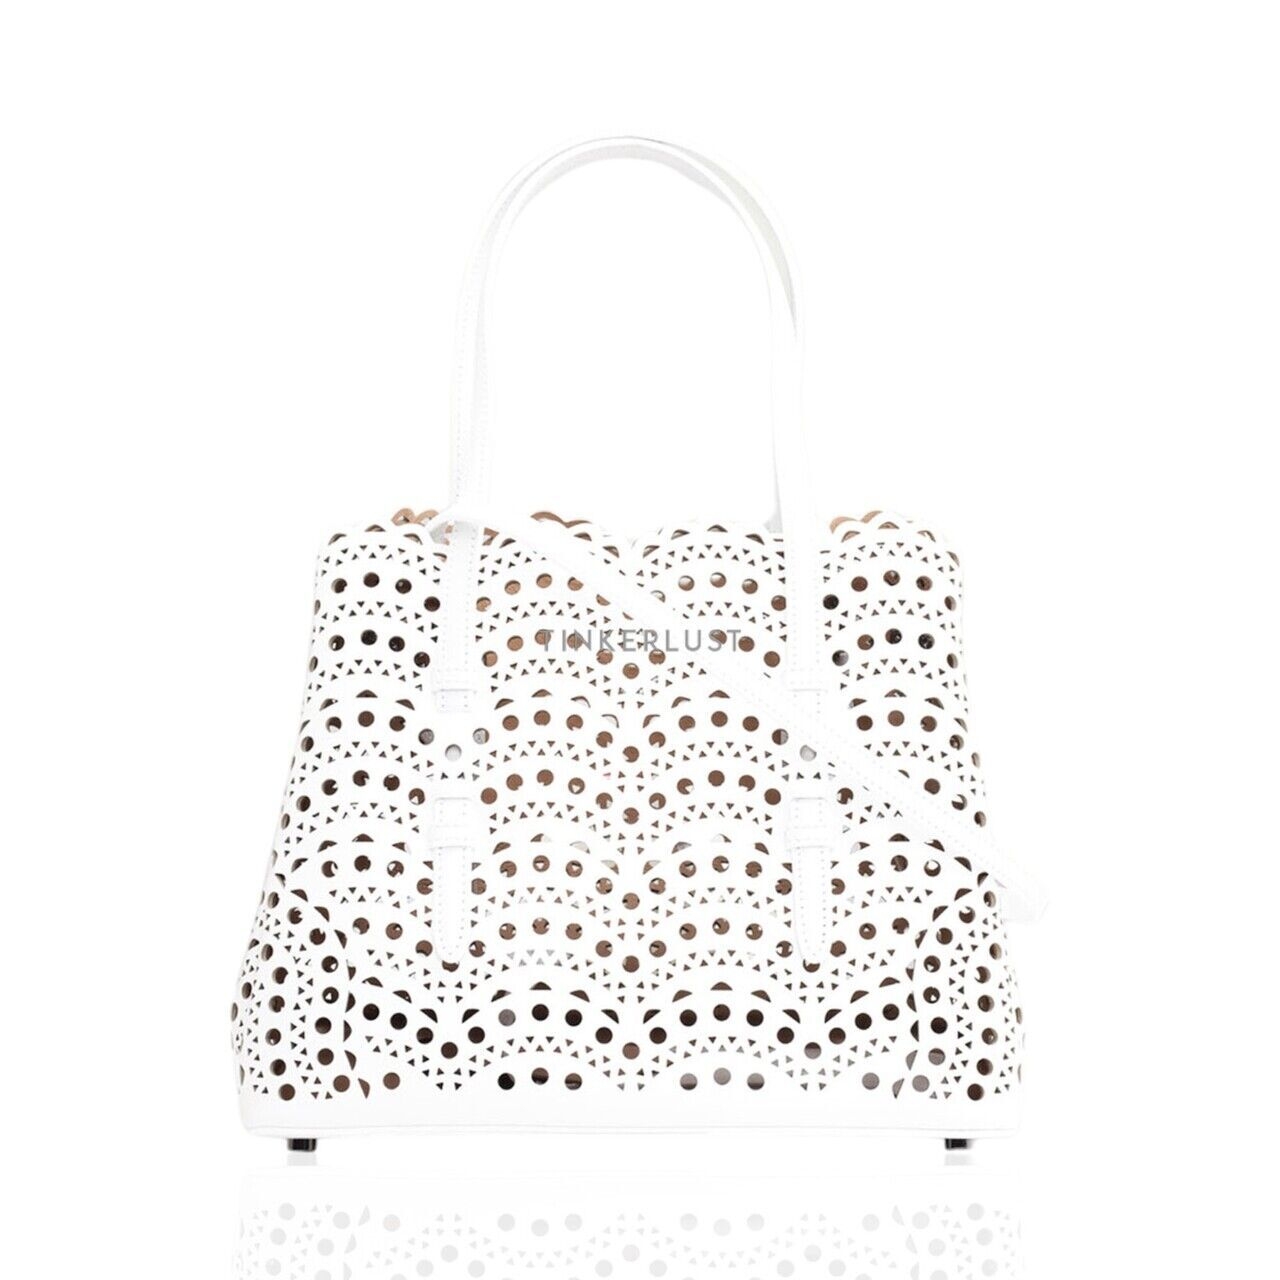 Alaia Mina 25 Lasered Handbag in White with Inner Pouch Satchel